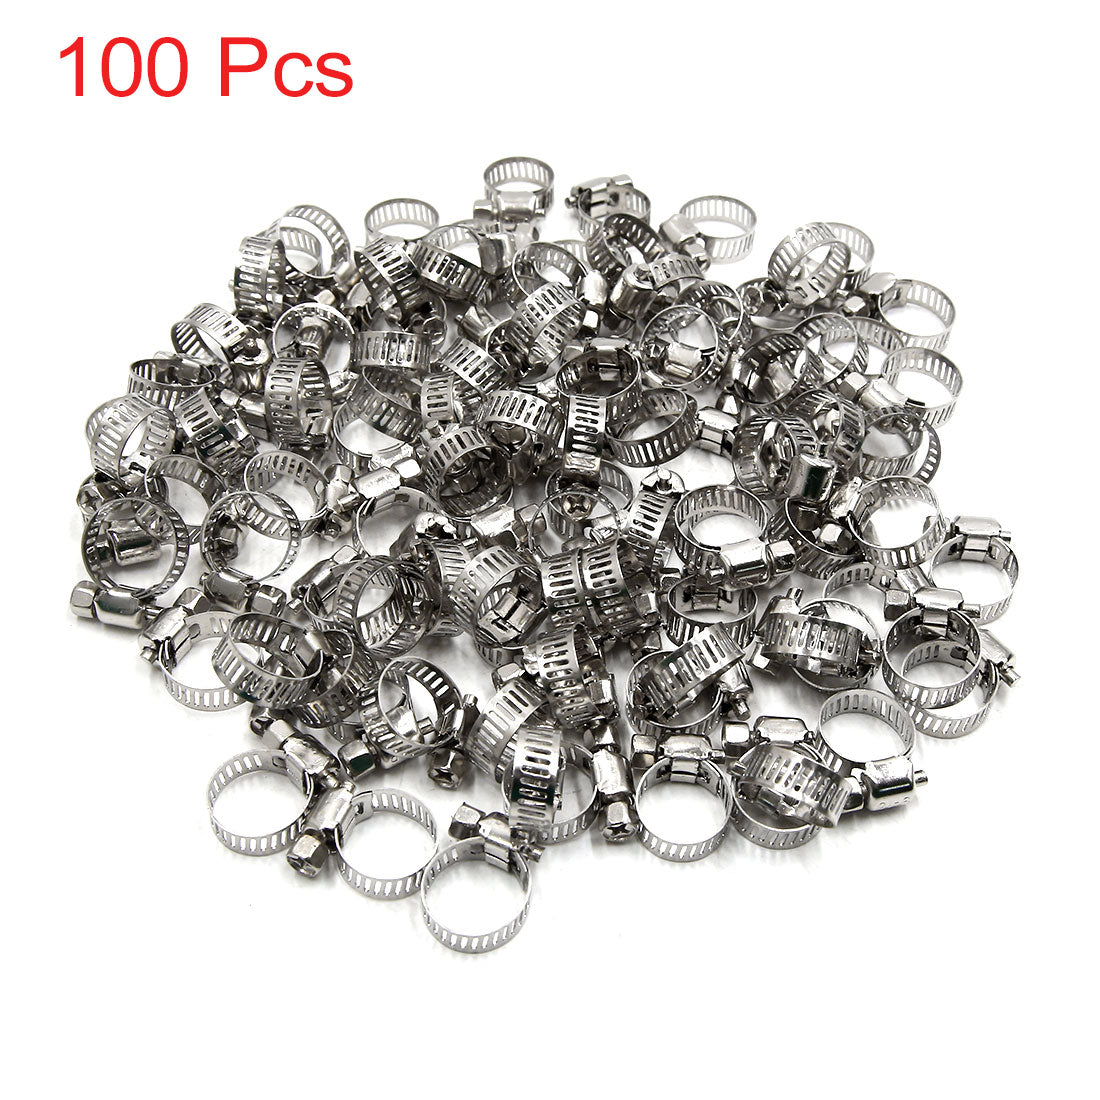 uxcell Uxcell 100pcs Car Stainless Steel Adjustable 9-16mm Hose Clamp Fuel Line Pipe Tube Clip